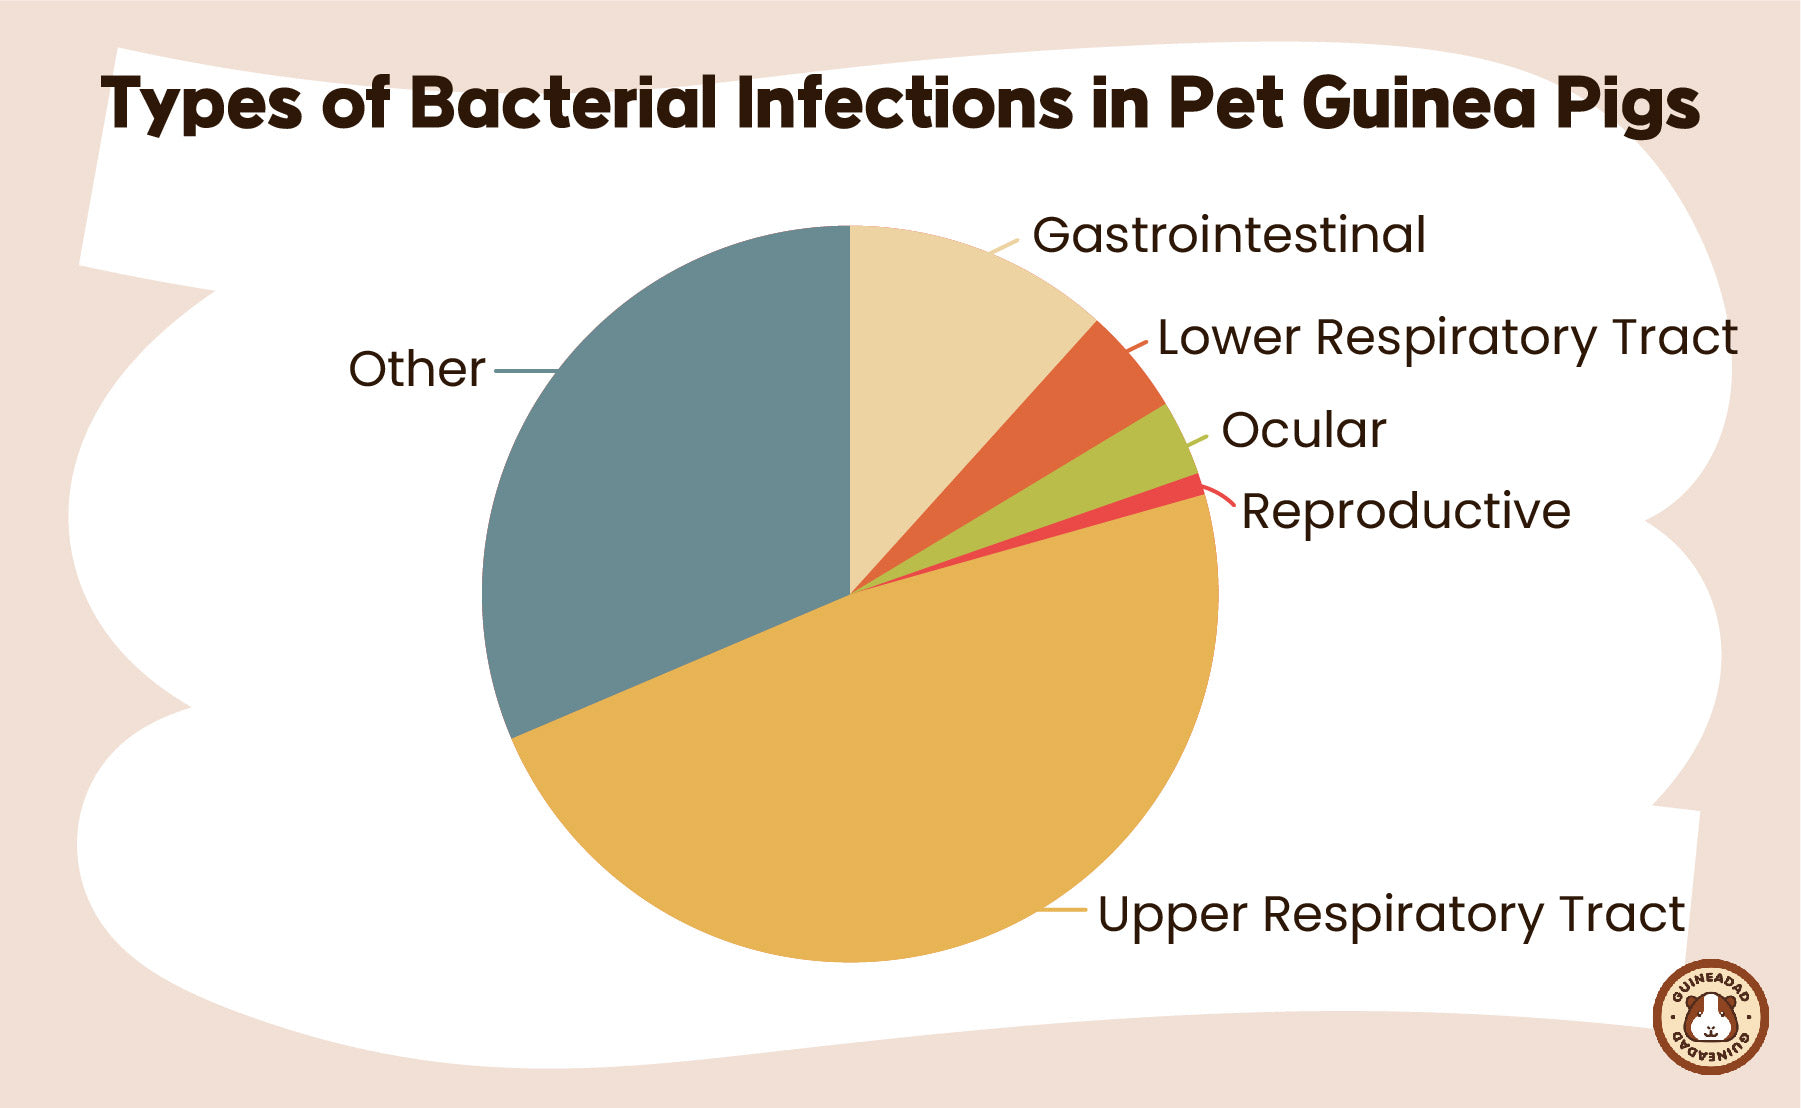 Types of Bacterial Infections in Pet Guinea Pigs